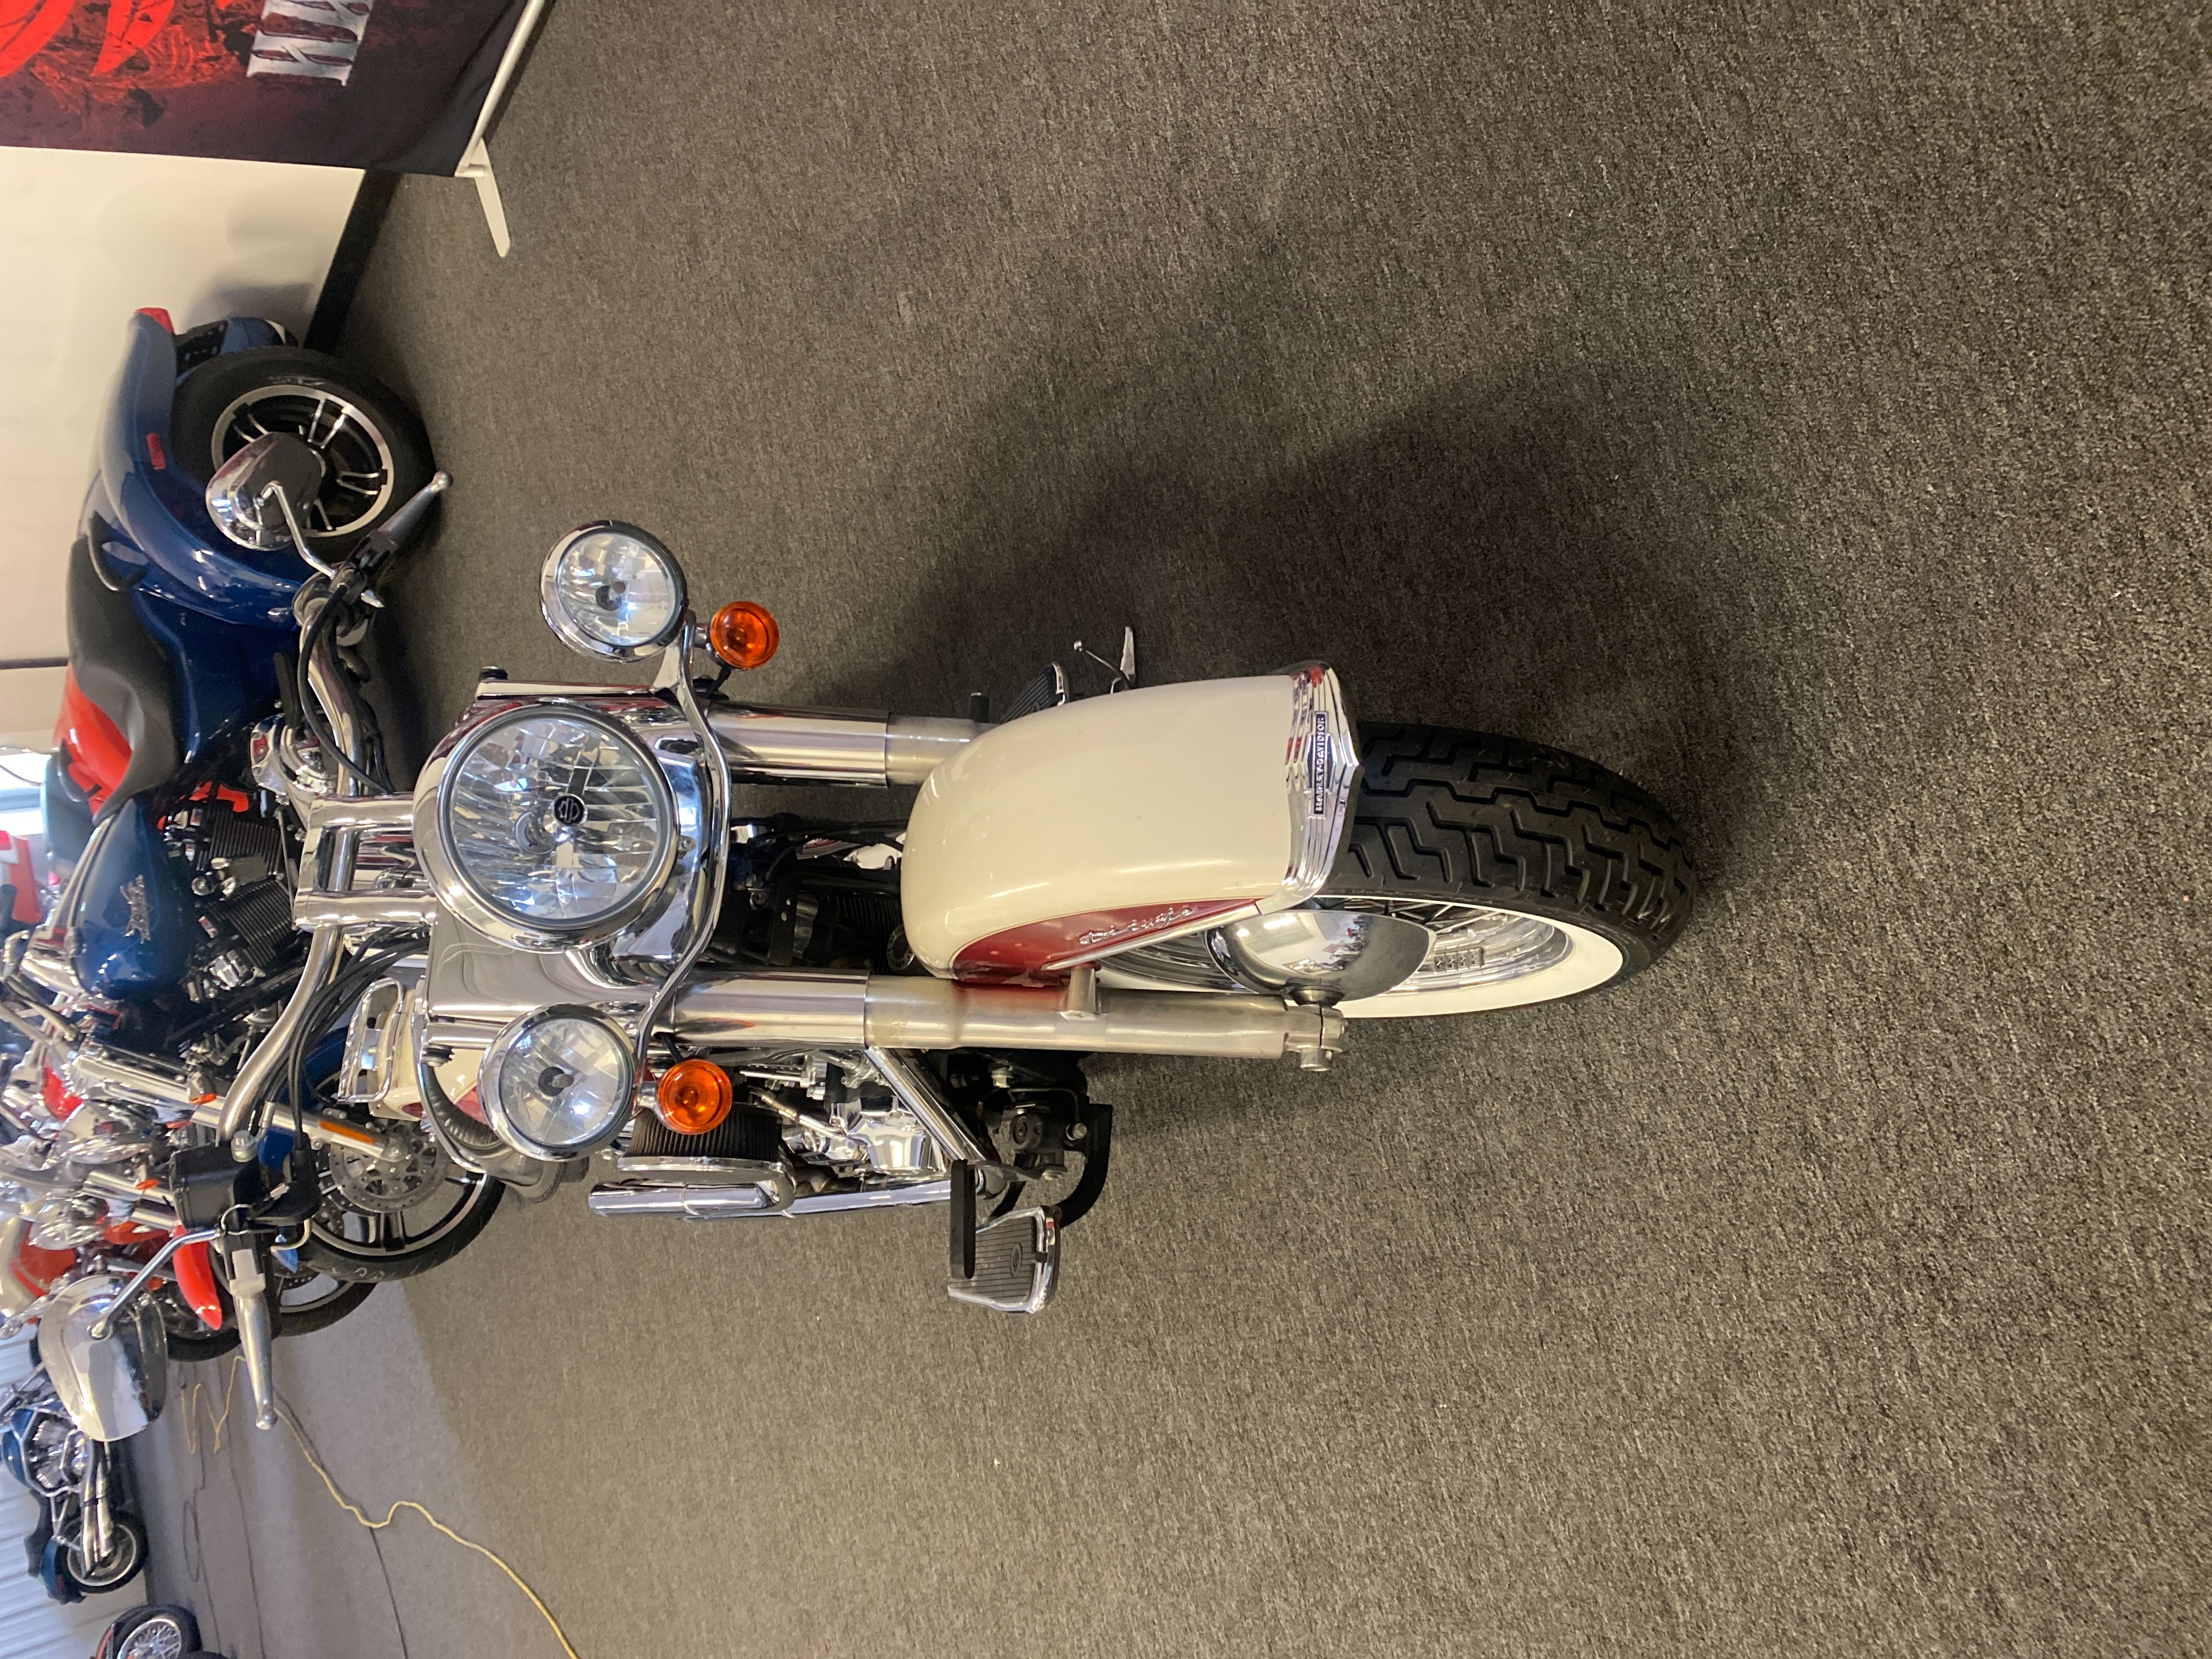 2012 Harley-Davidson Softail Deluxe at Outpost Harley-Davidson